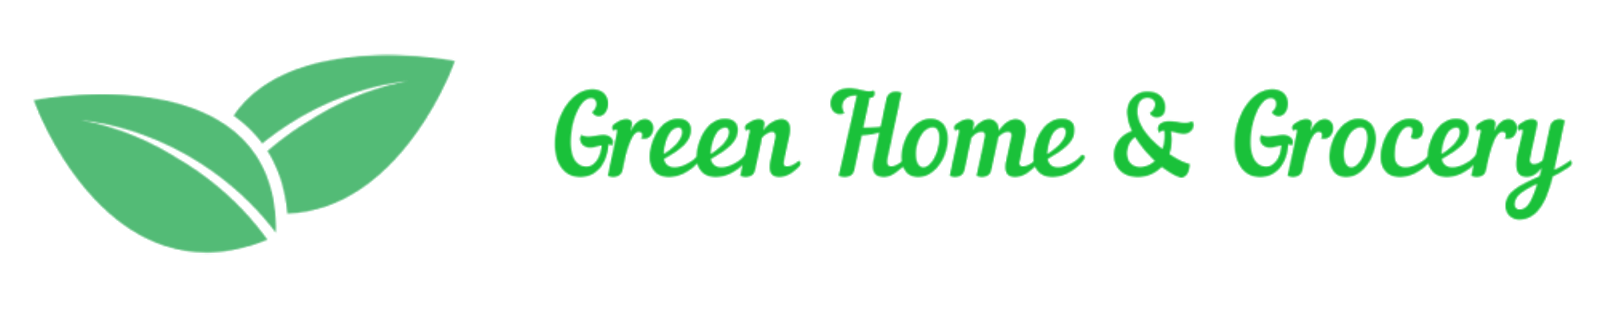 Green Home and Grocery